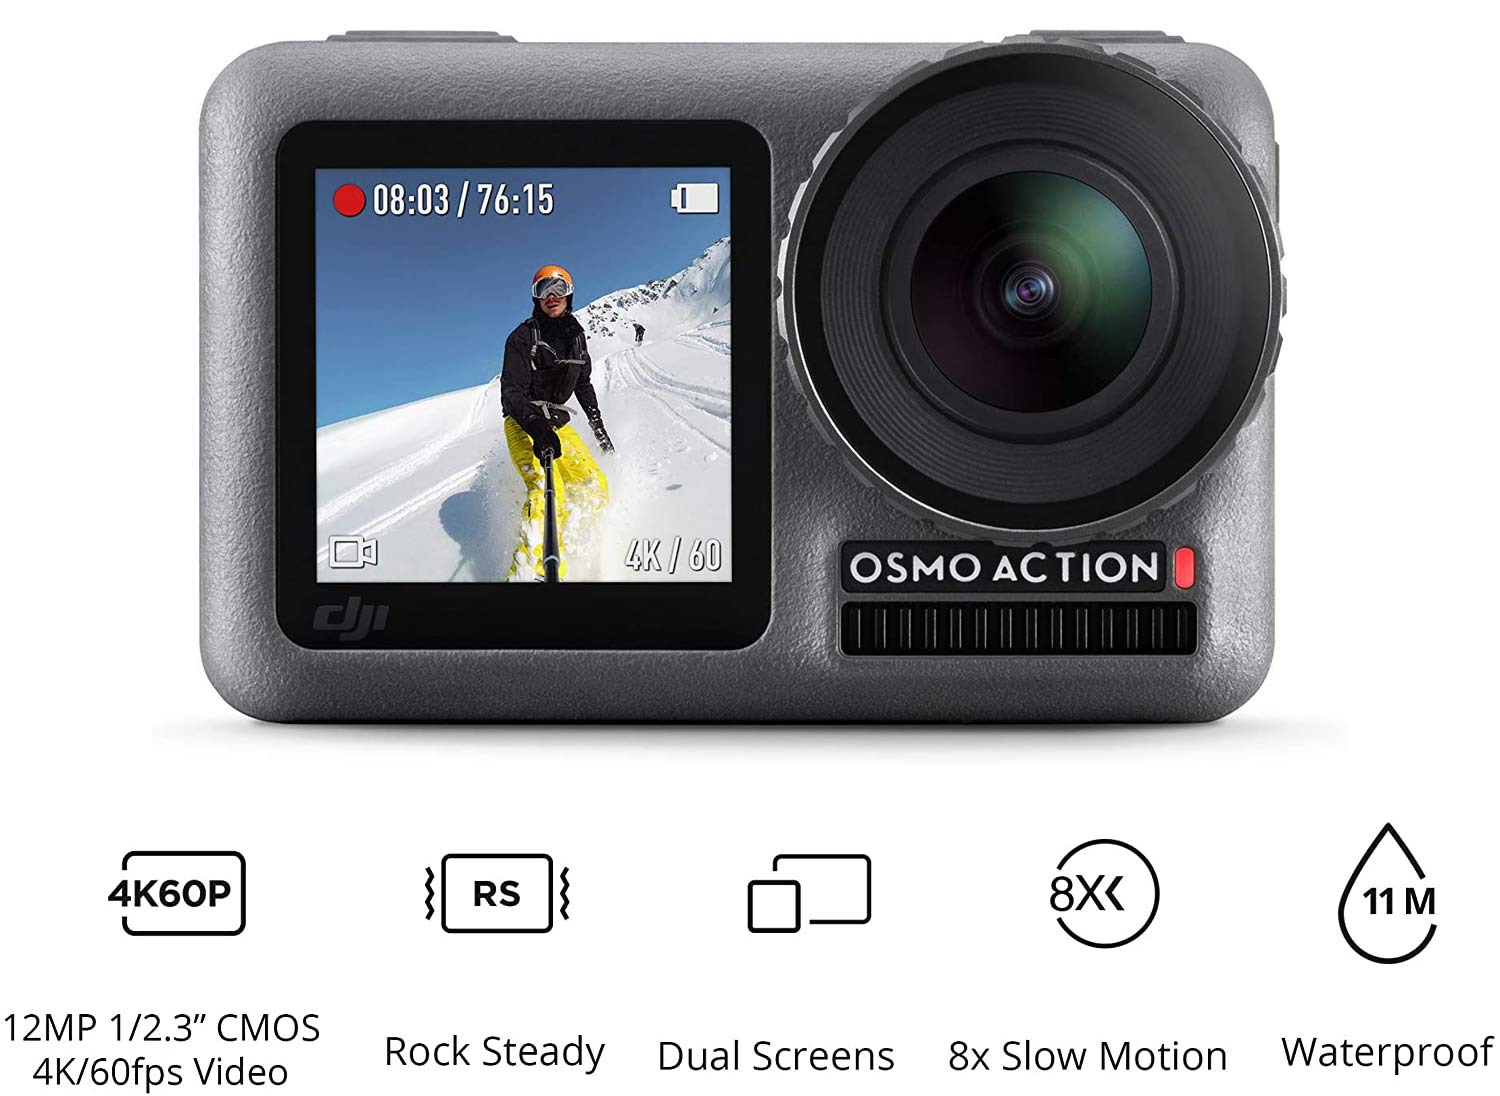 dji osmo action camera on sale with huge discount on extra battery bundles